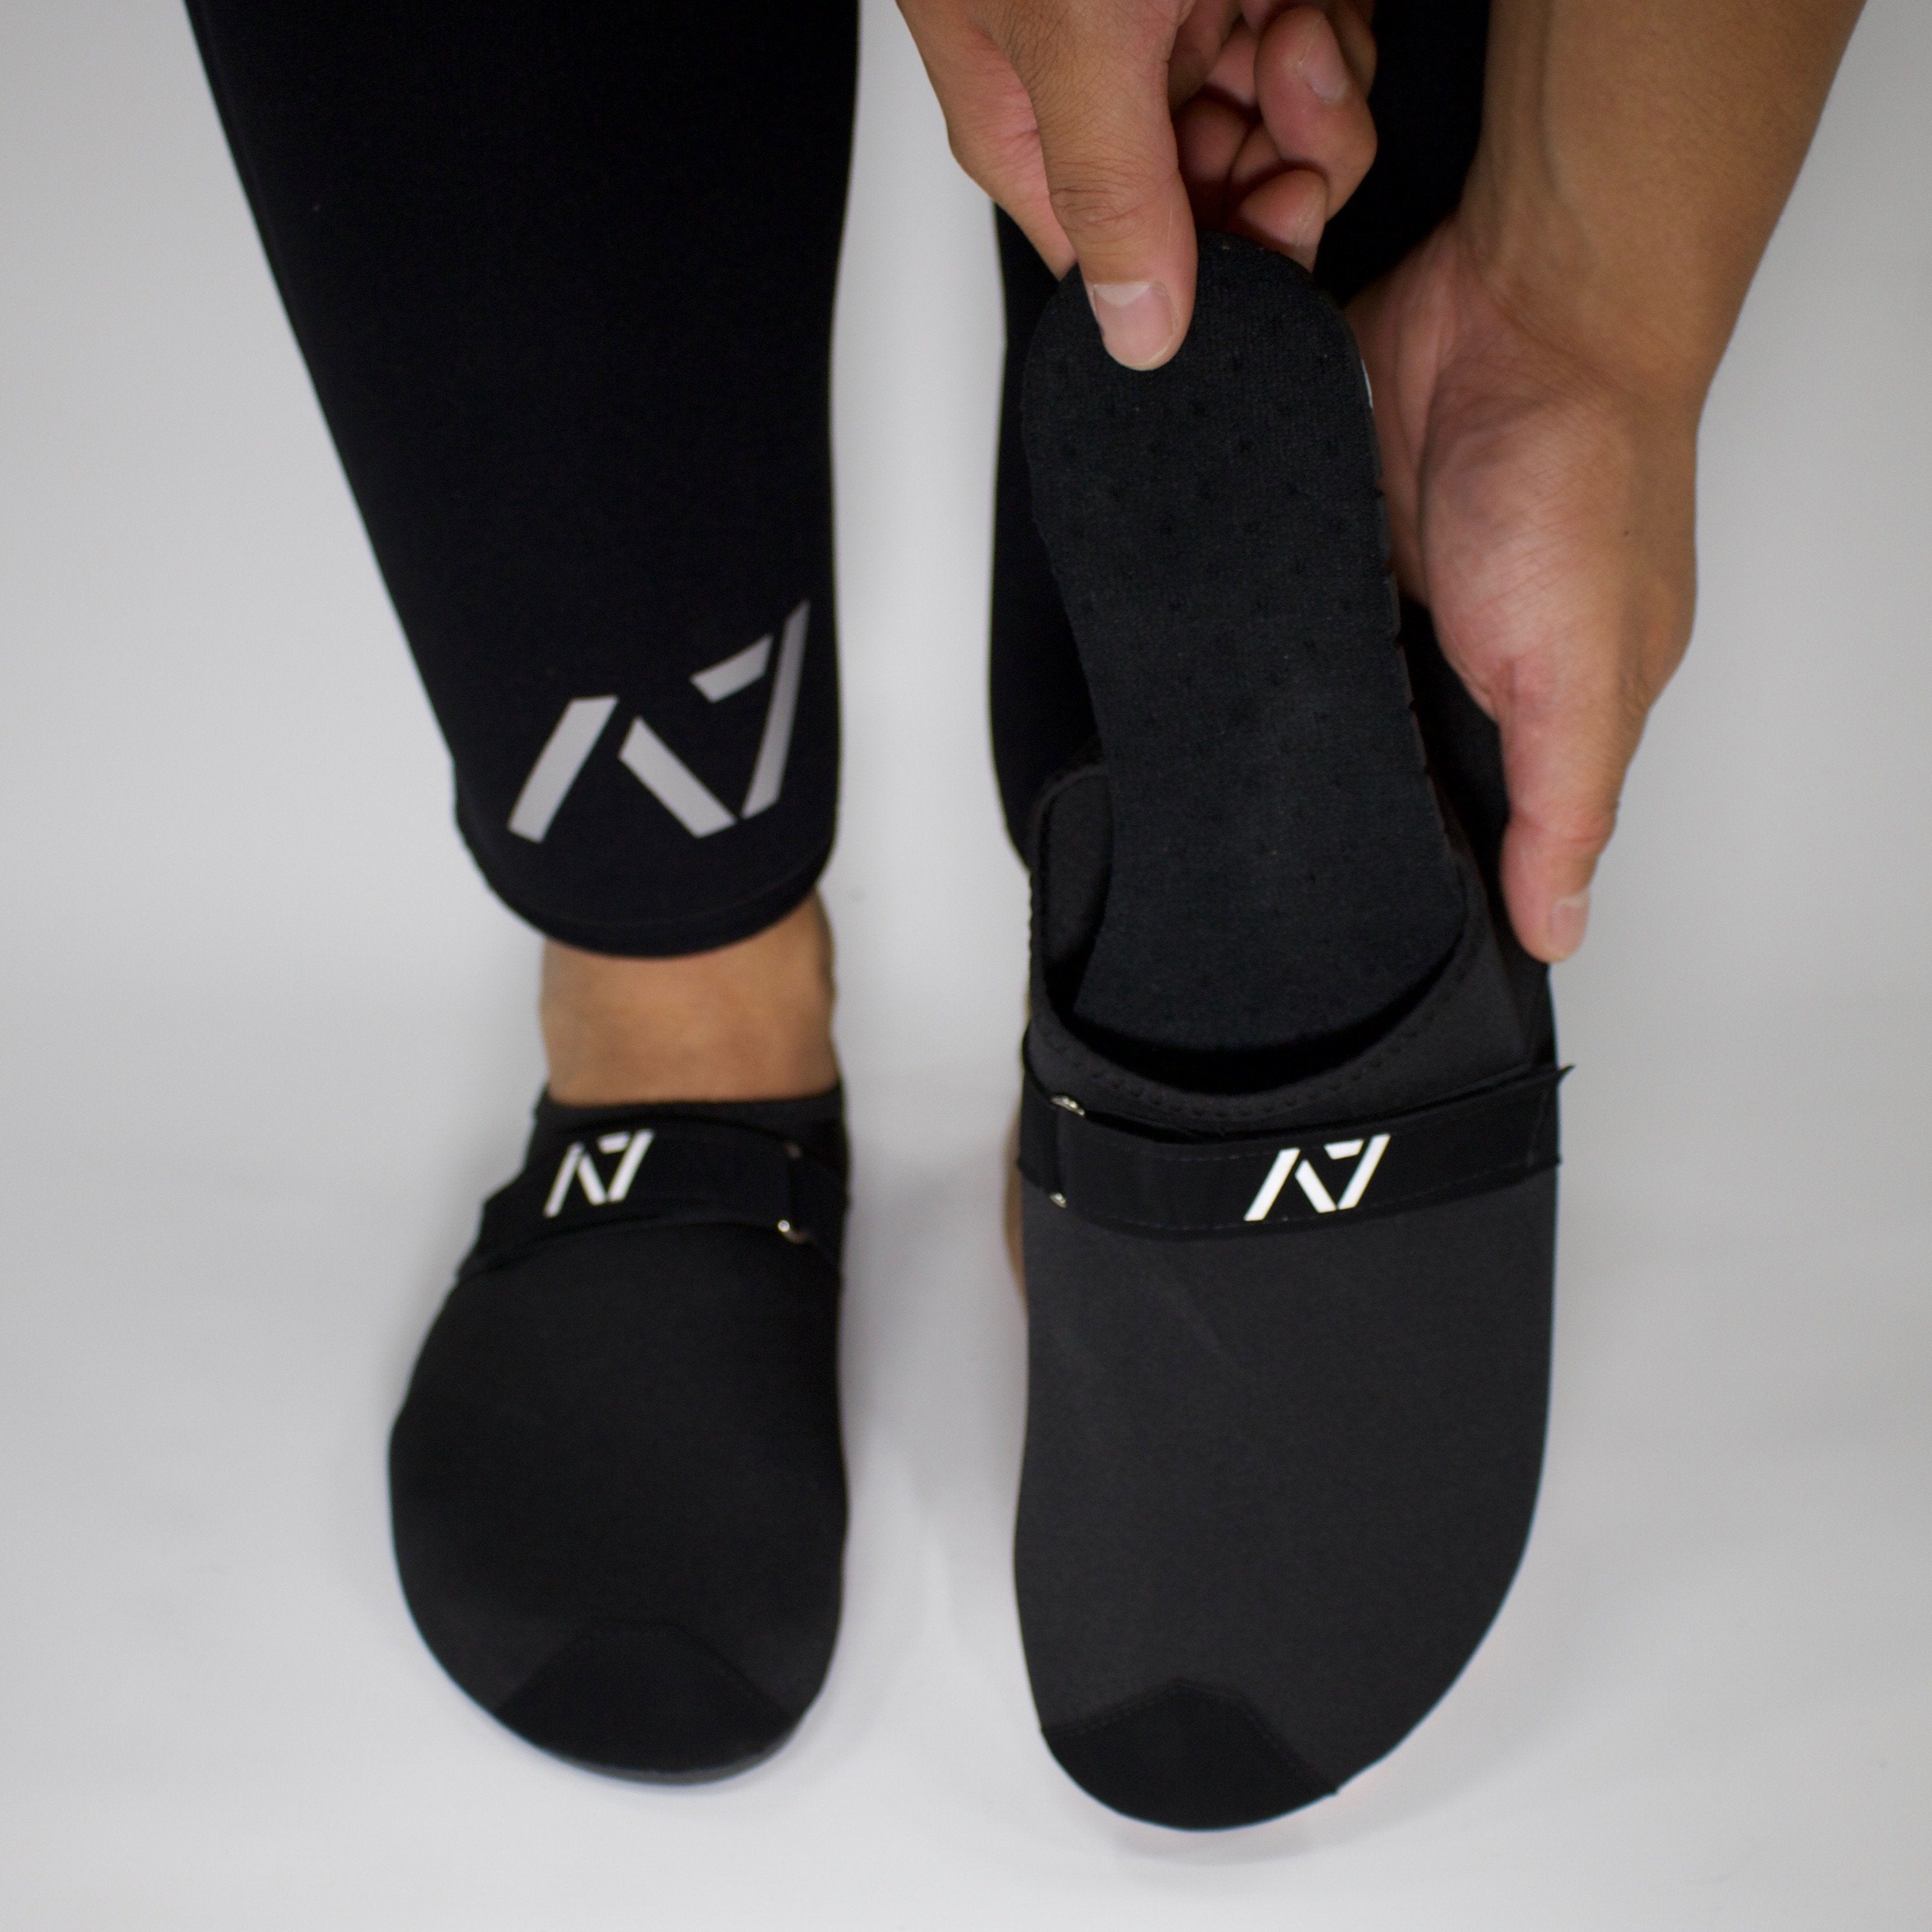 A7 Go Slippers | A7 Europe Shipping to EU – A7 EUROPE